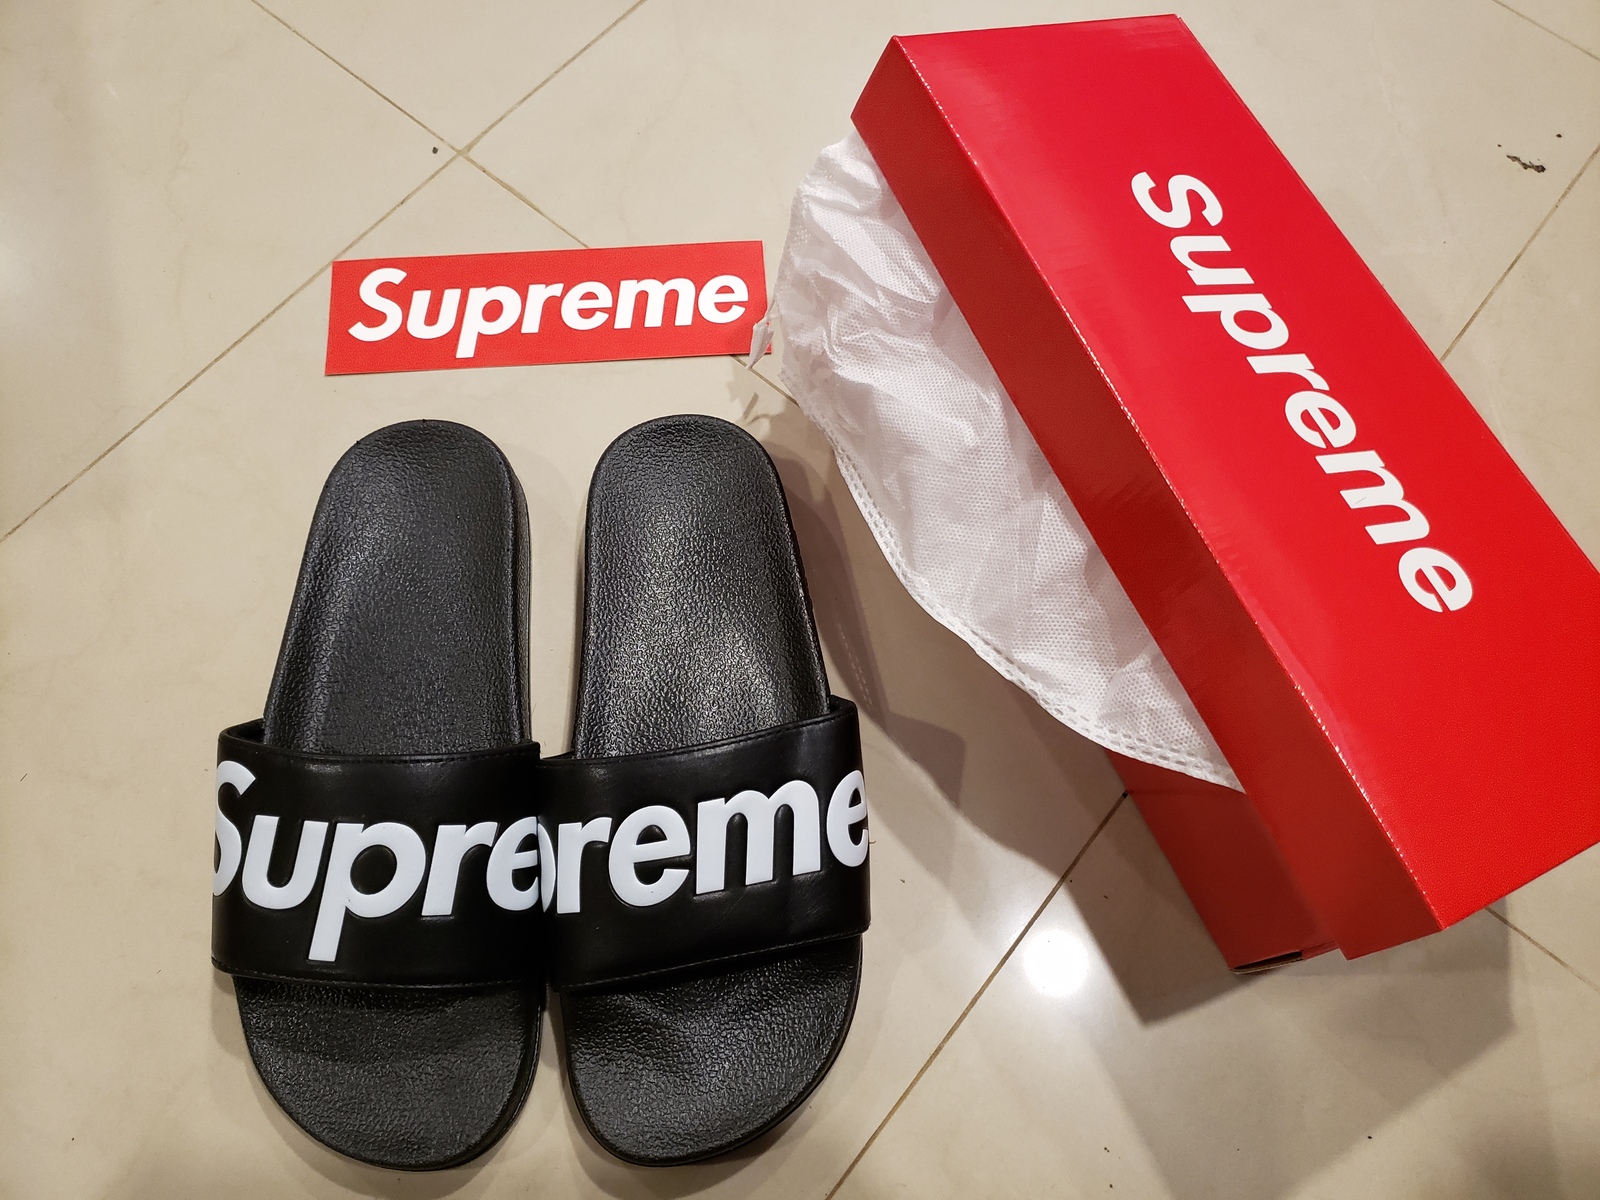 Supreme Slippers Flip Flop Shoes Red Black Classic Logo FREE FAST US